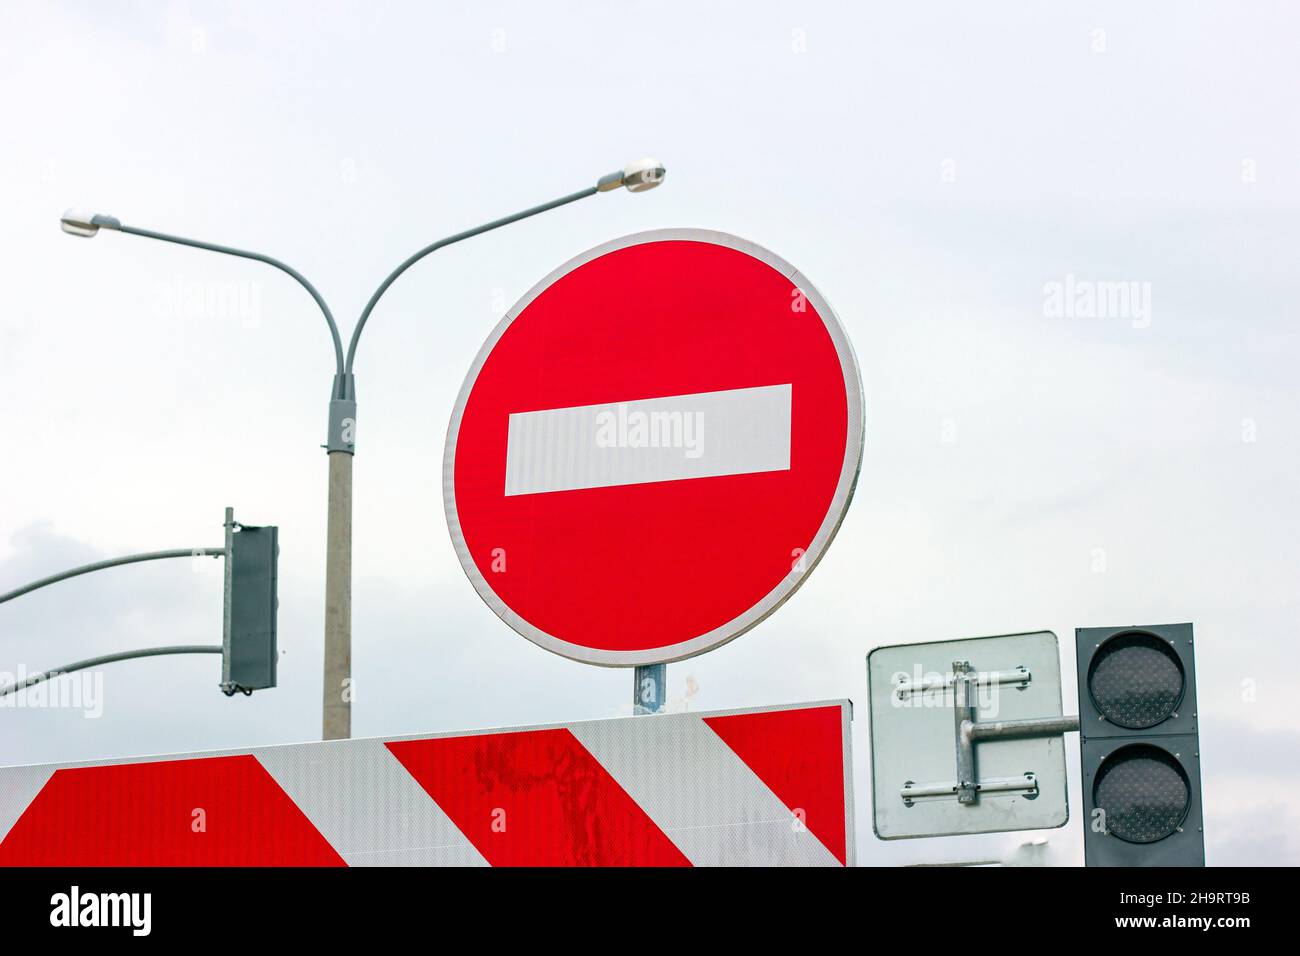 Red and white Do not enter and other signs on gray dull overcast sky background. Stock Photo